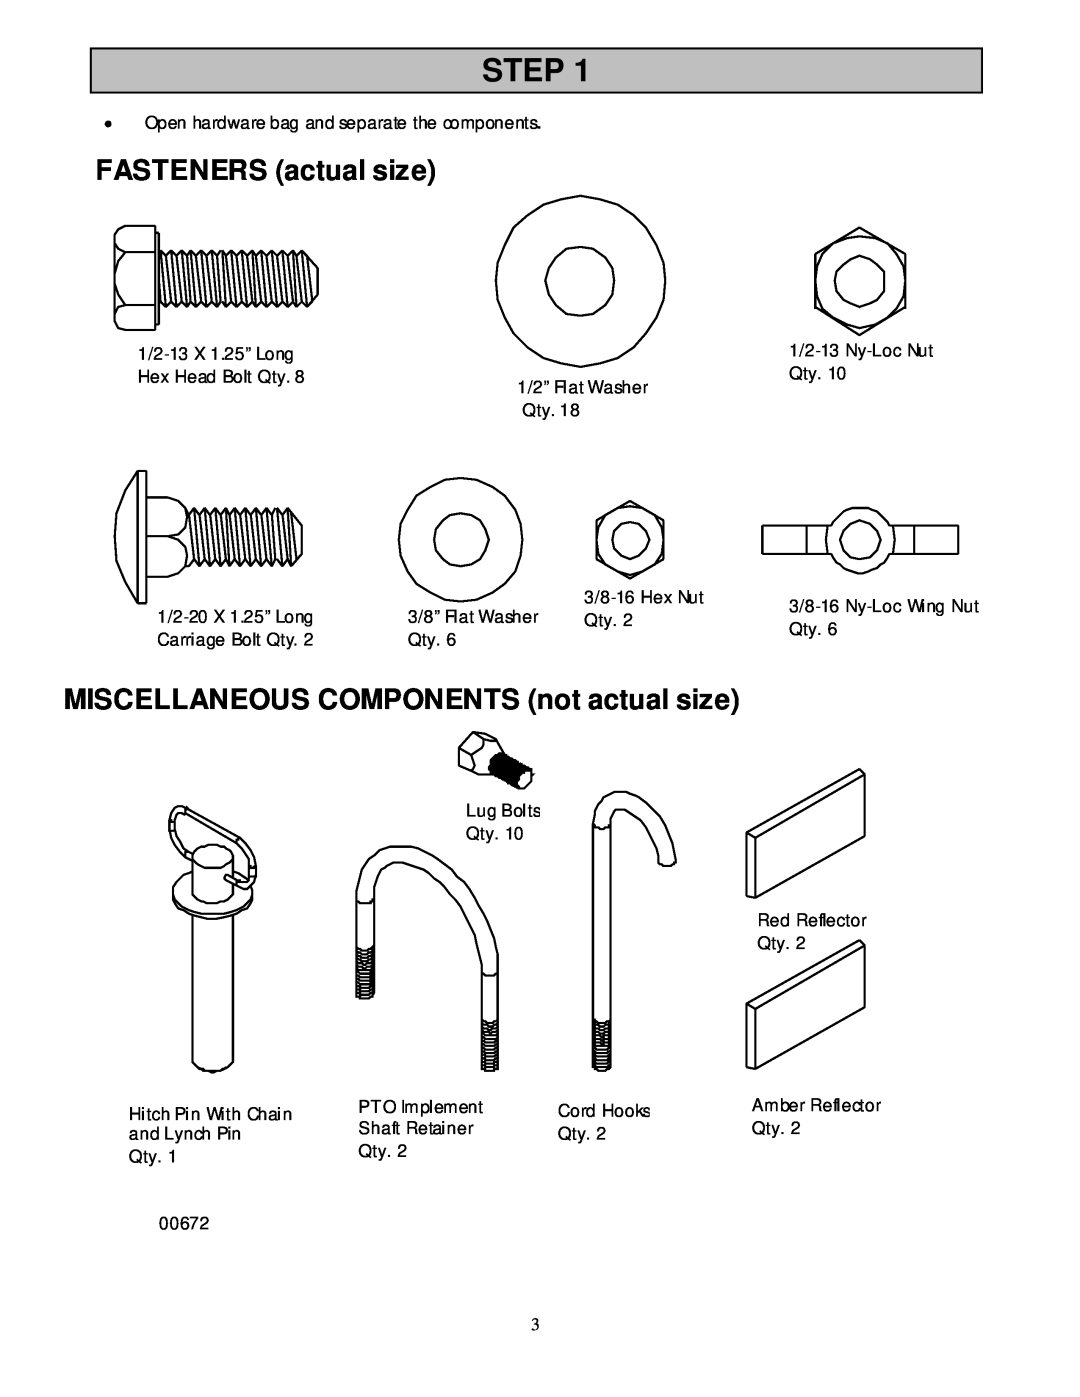 North Star 165959 owner manual Step, FASTENERS actual size, MISCELLANEOUS COMPONENTS not actual size 